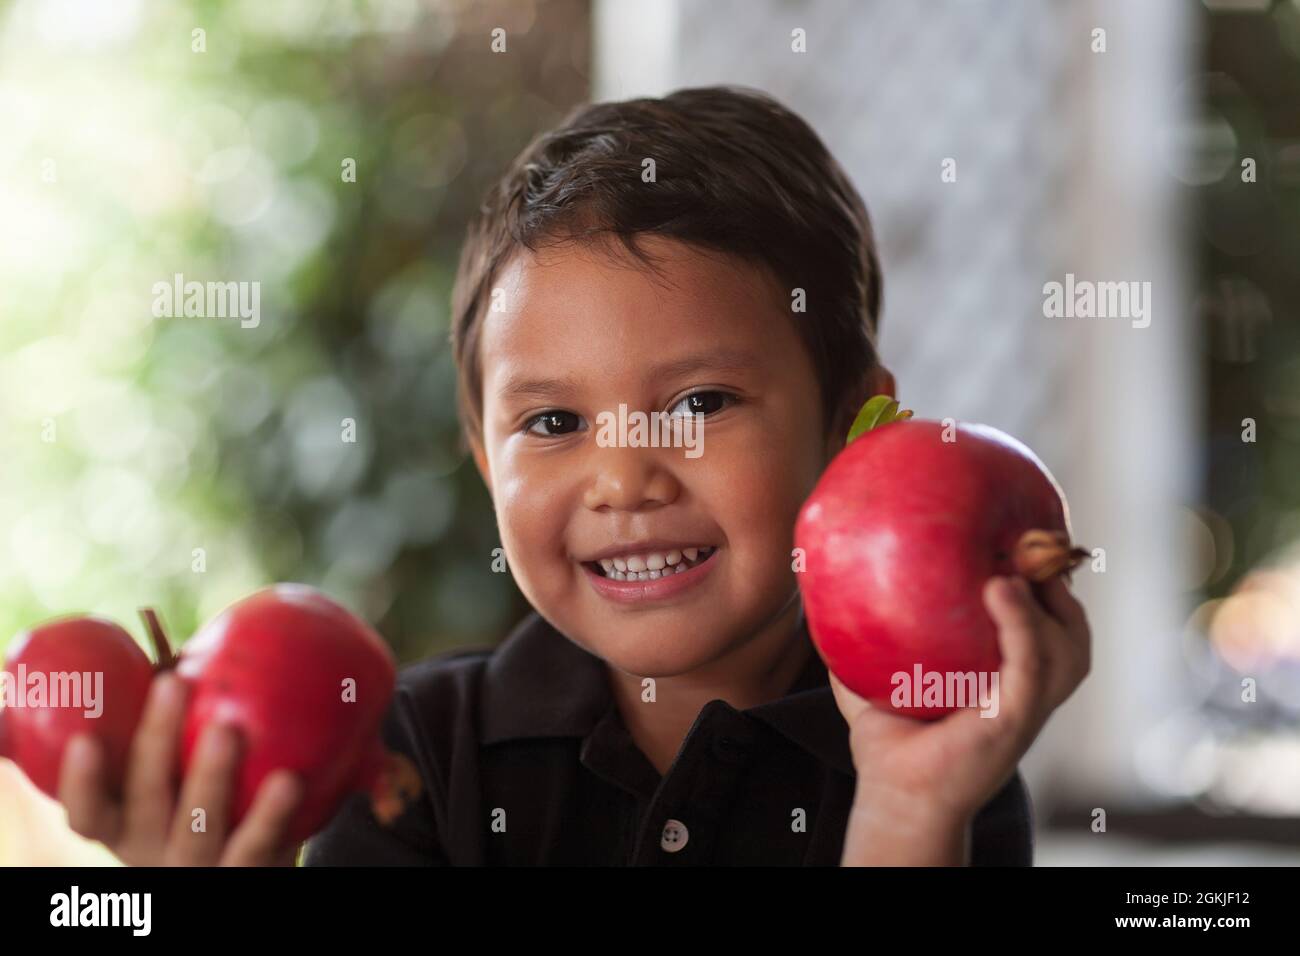 Smiling child holding up in his little hands some freshly cut pomegranates that are grown organically. Stock Photo